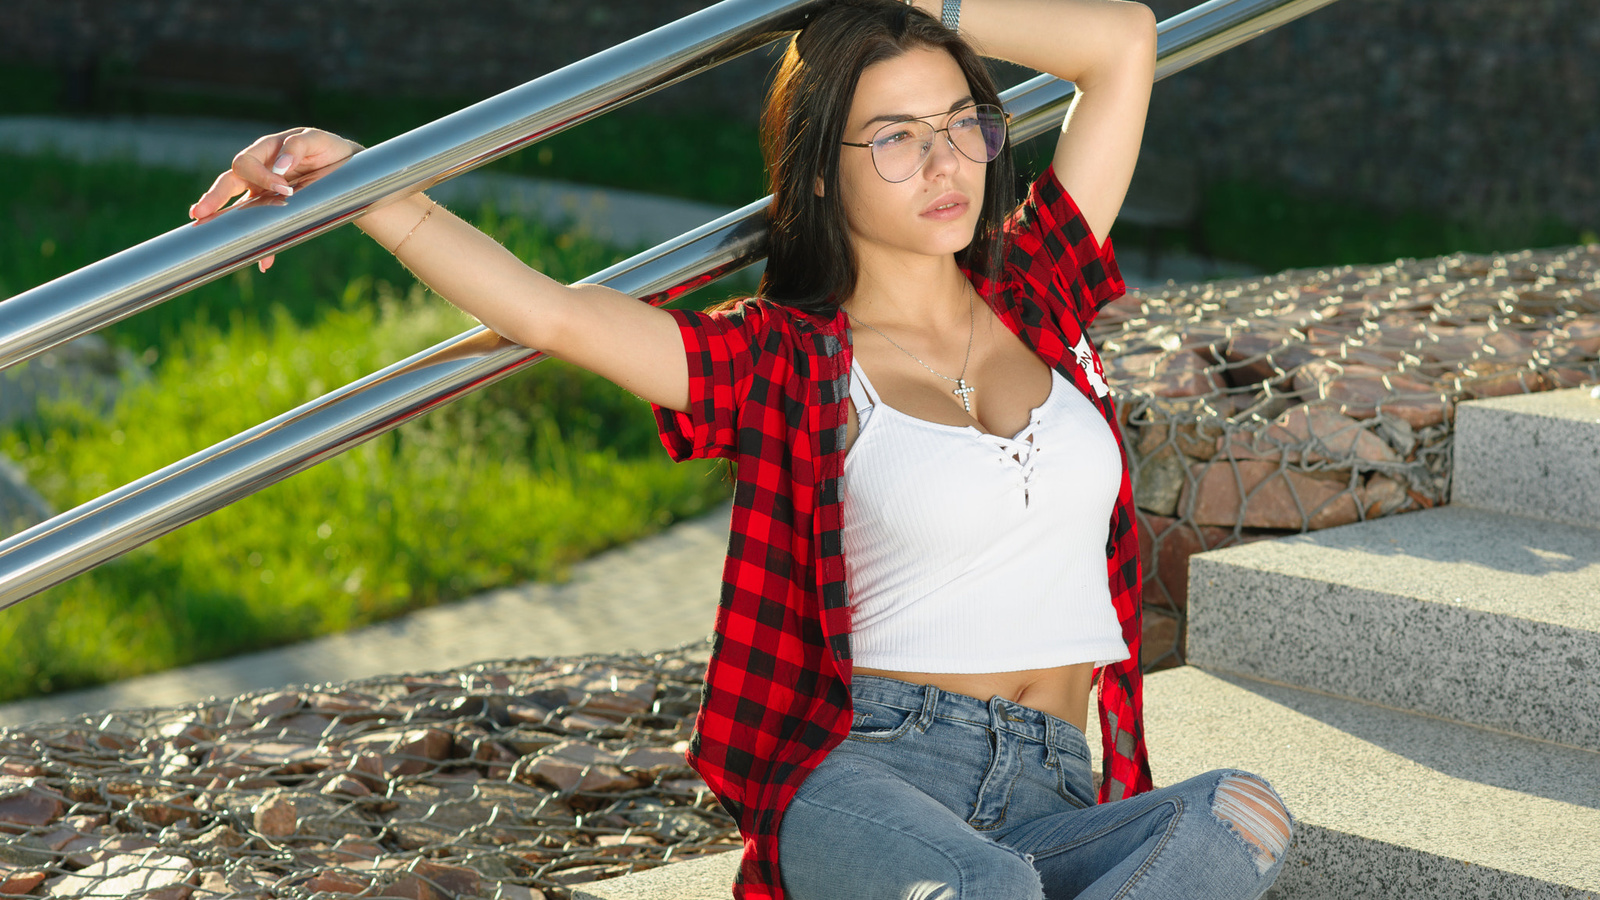 women, portrait, plaid shirt, torn jeans, stairs, sitting, women with glasses